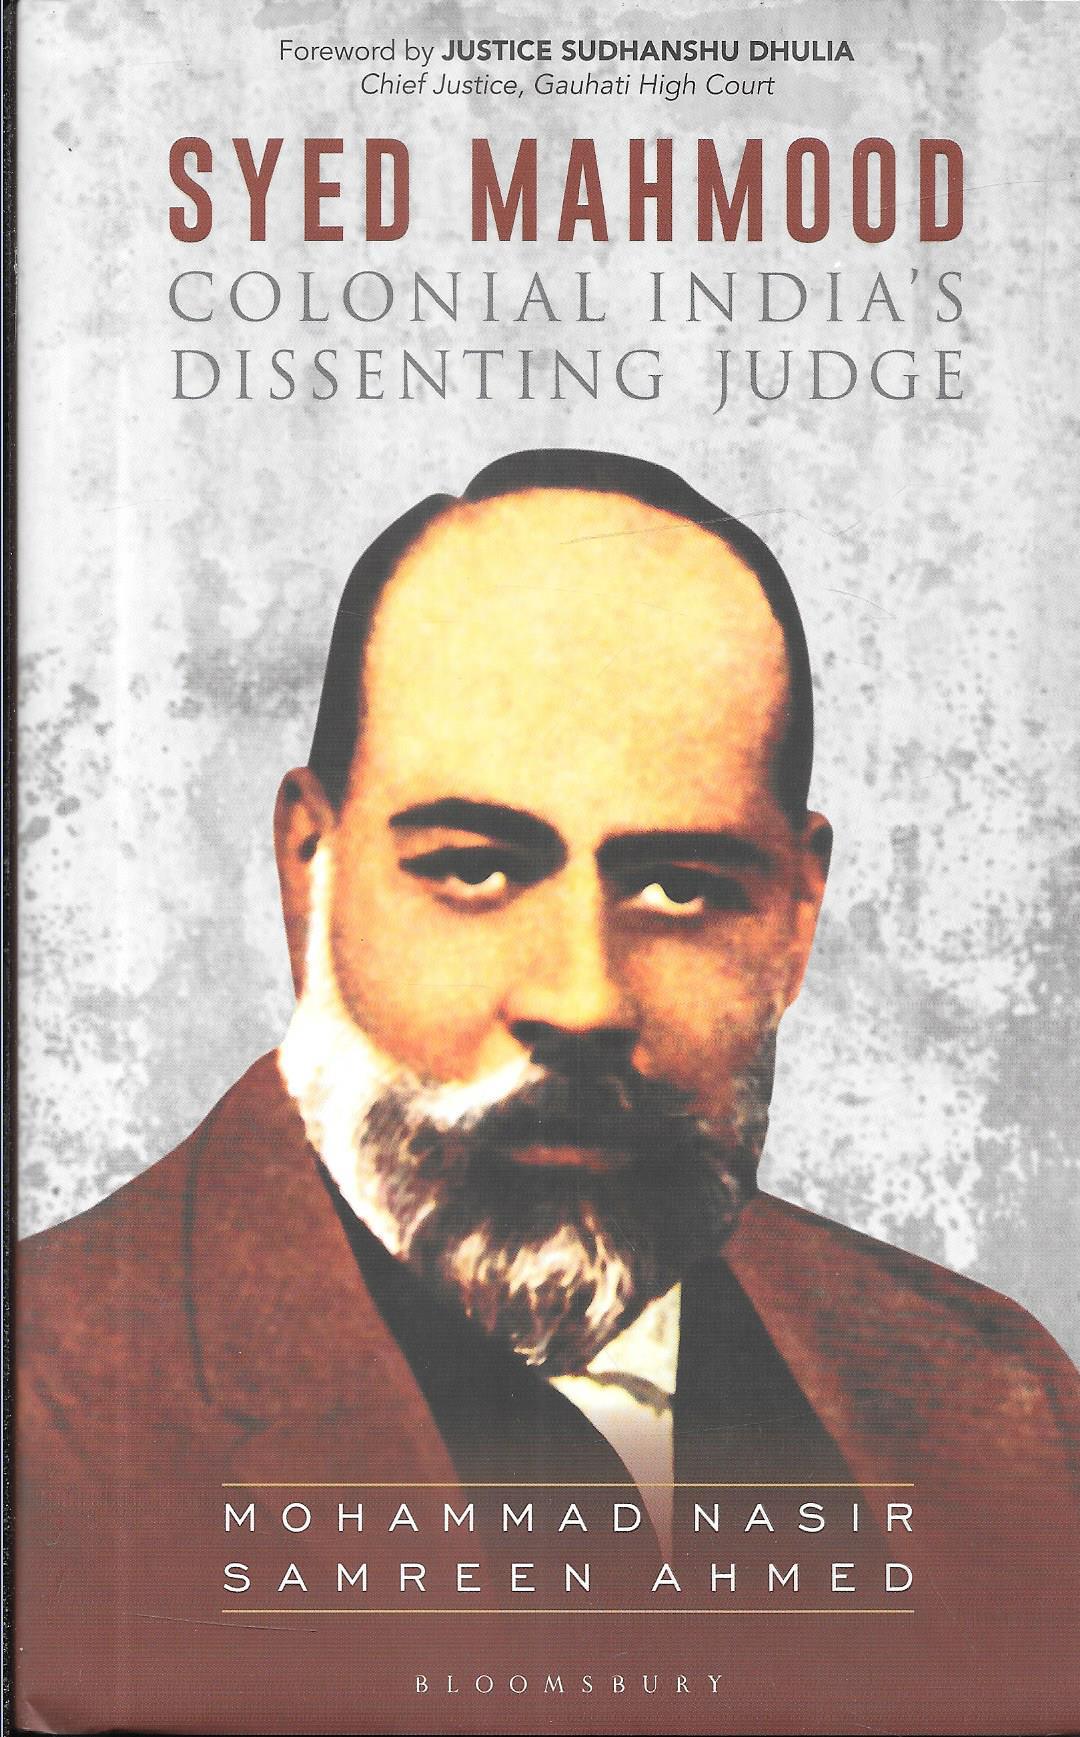 Syed Mahmood - Colonial India's Dissenting Judge